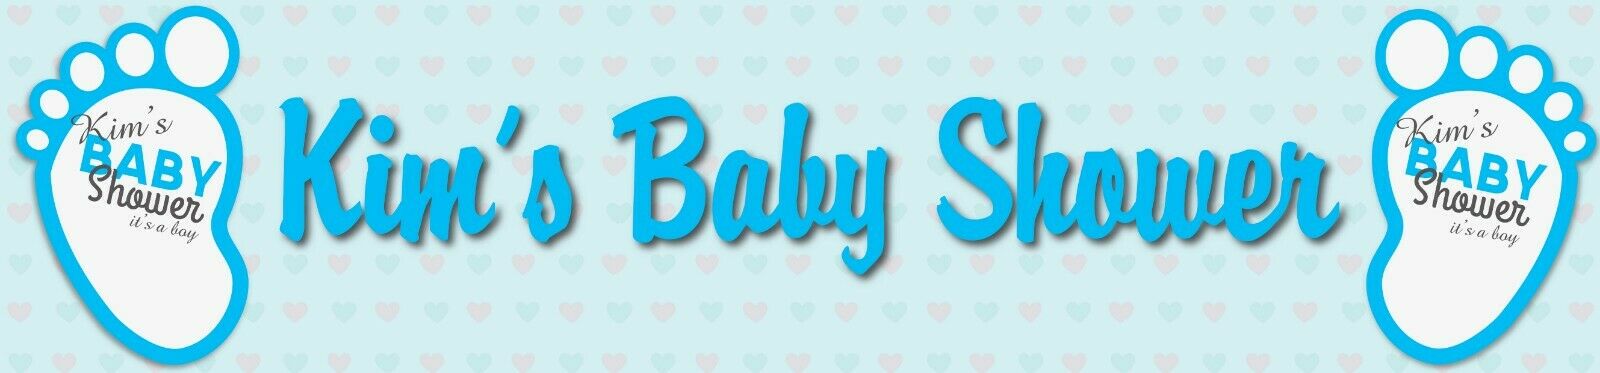 personalised banners - Baby Shower Banner